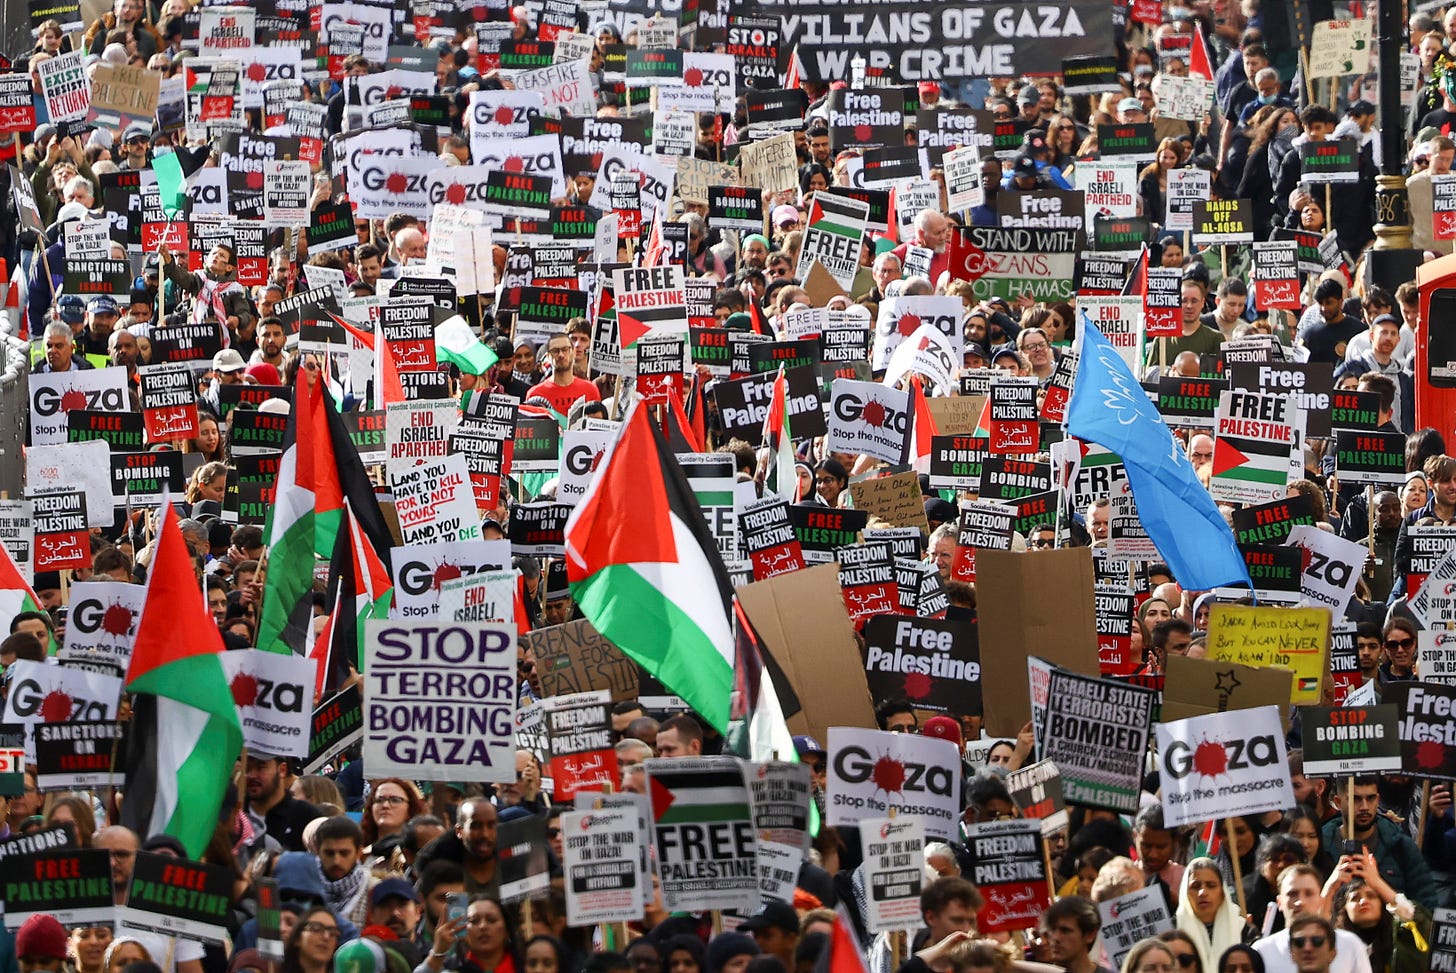 About 100,000 protesters join pro-Palestinian march through London | Reuters